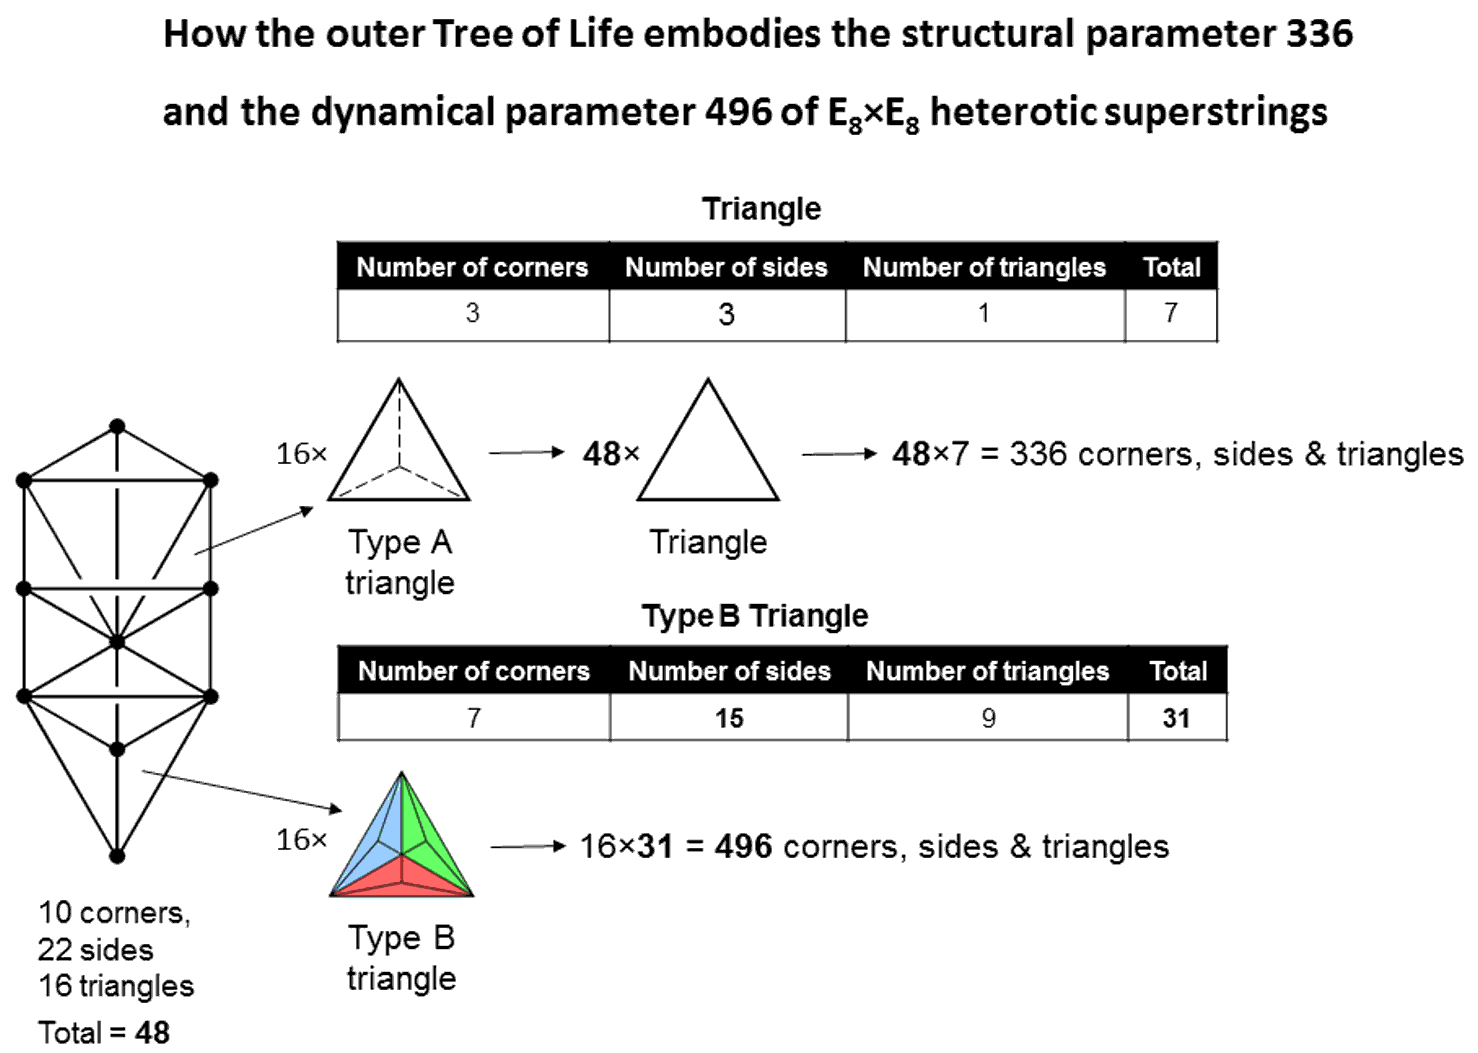 Outer Tree of Life embody superstring parameters 496 & 336